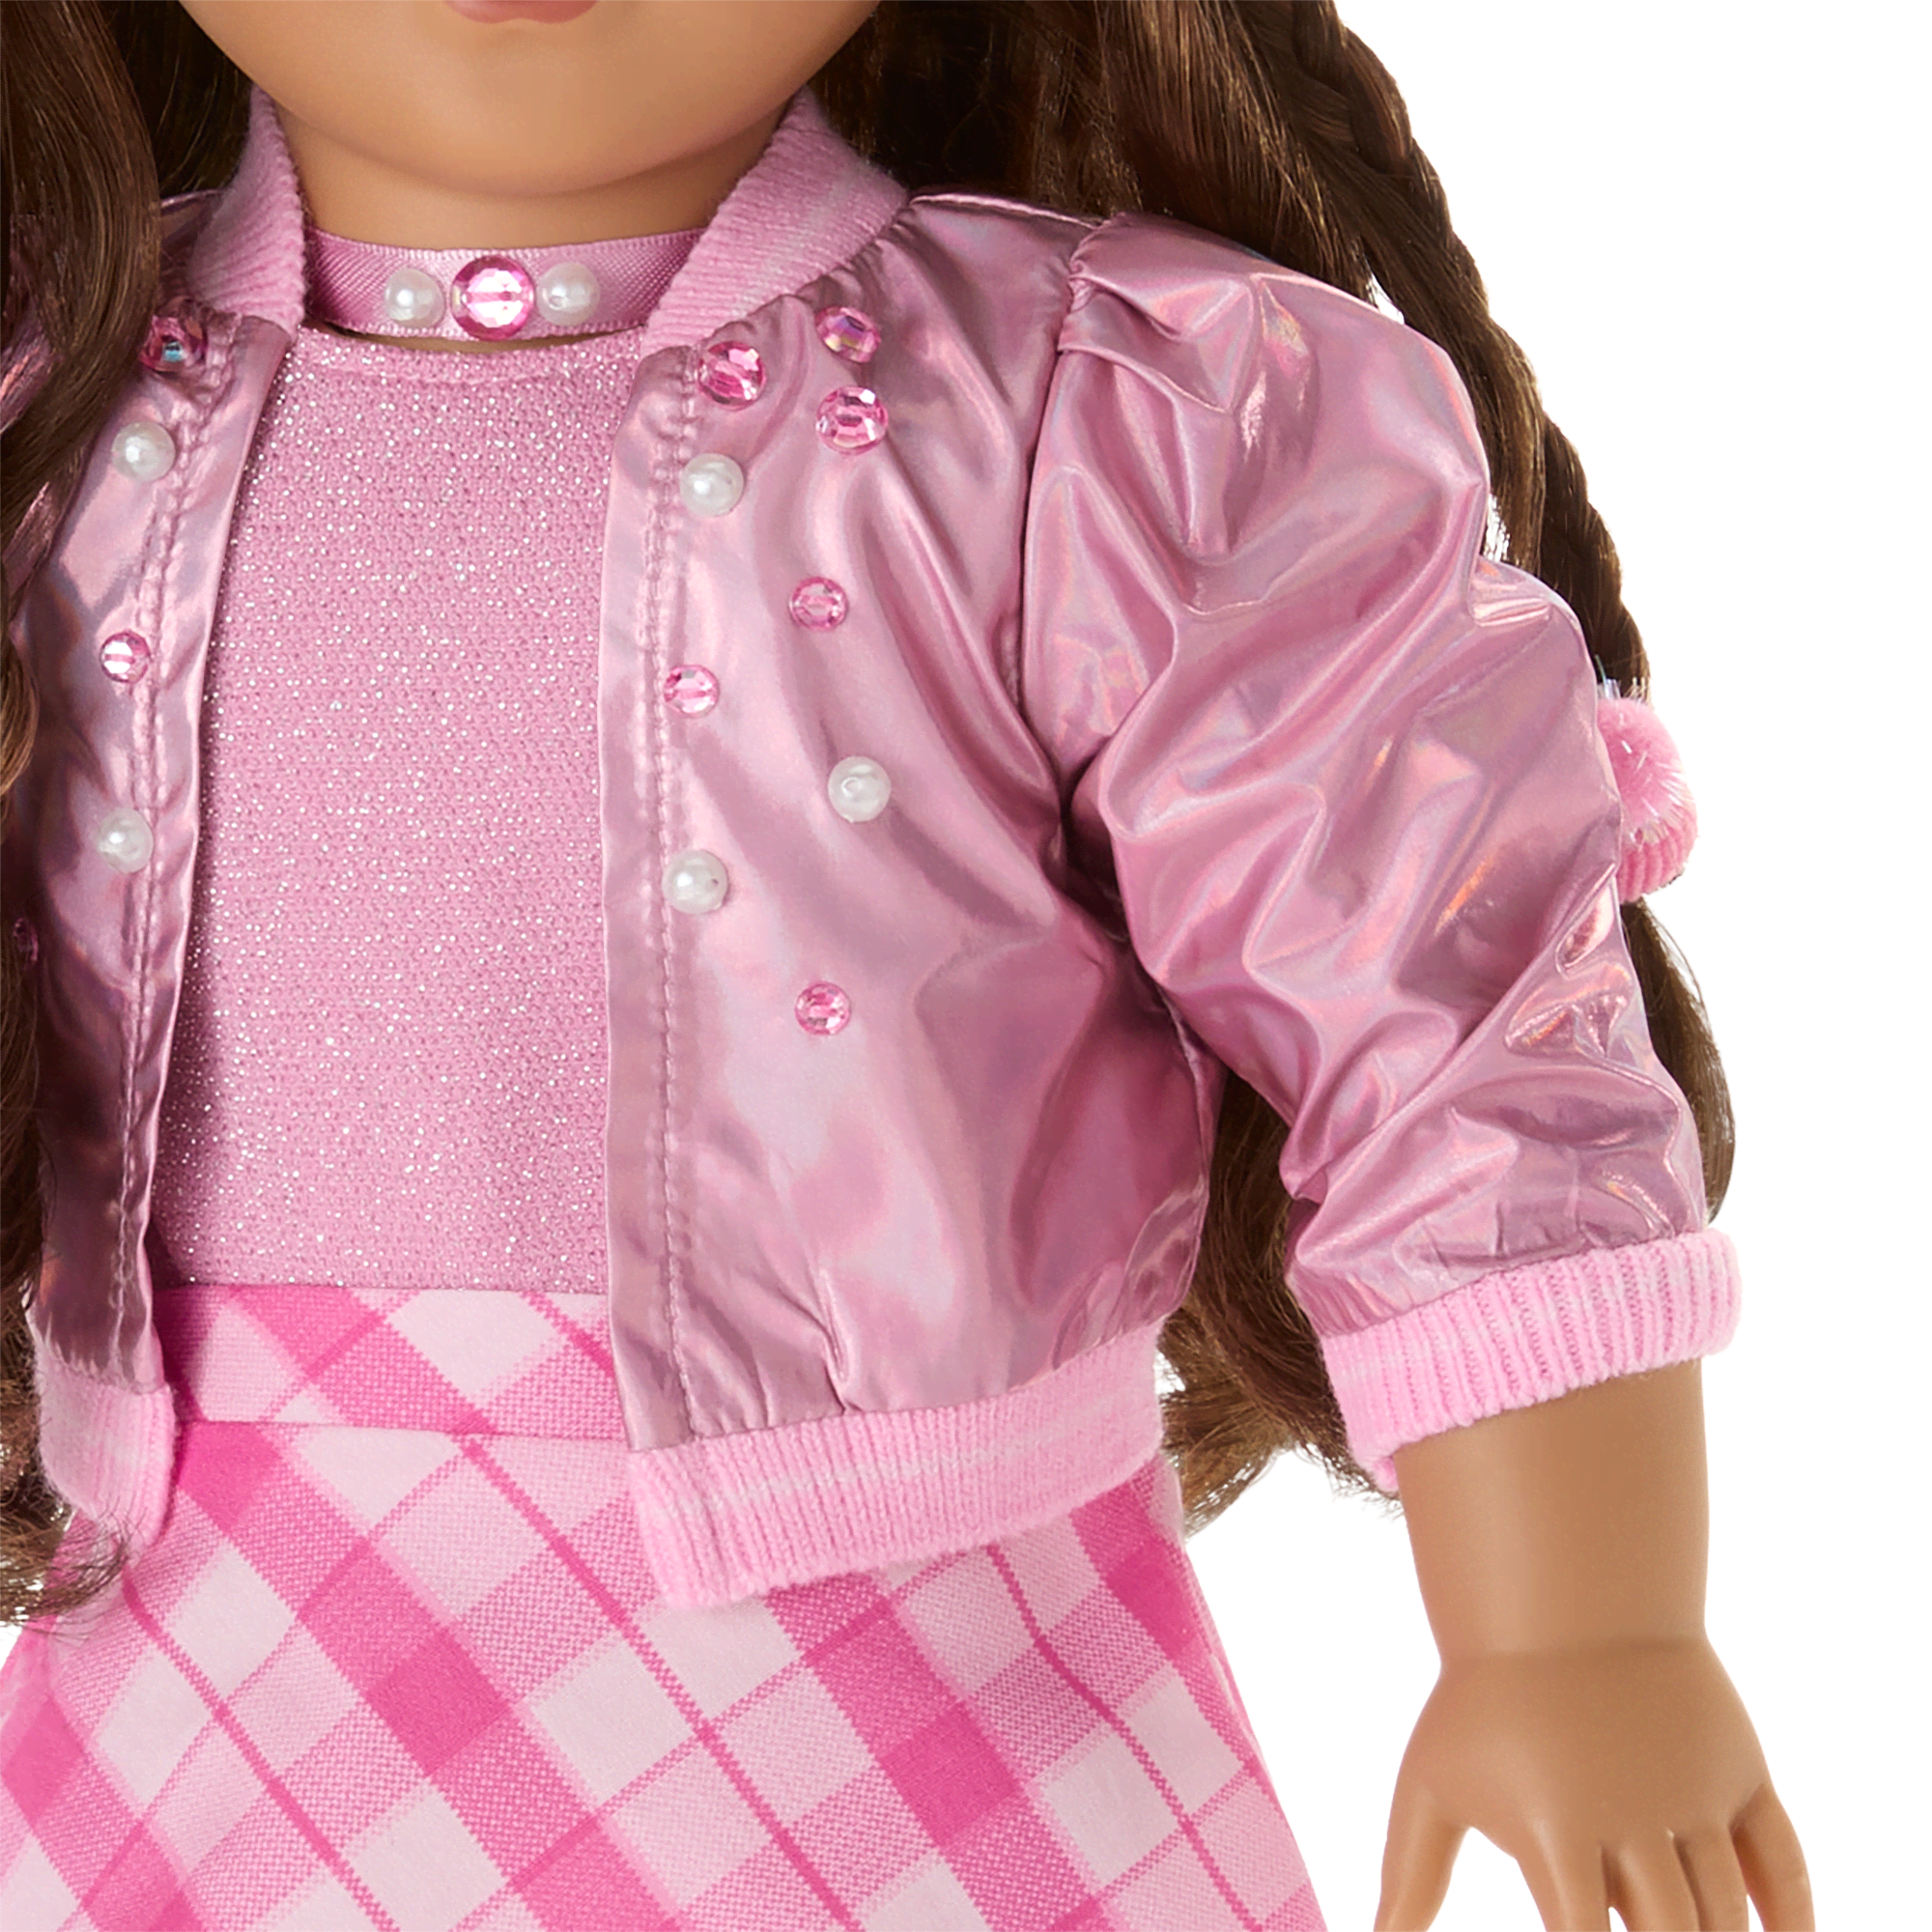 October Twinkling Tourmaline Outfit for 18-inch Dolls